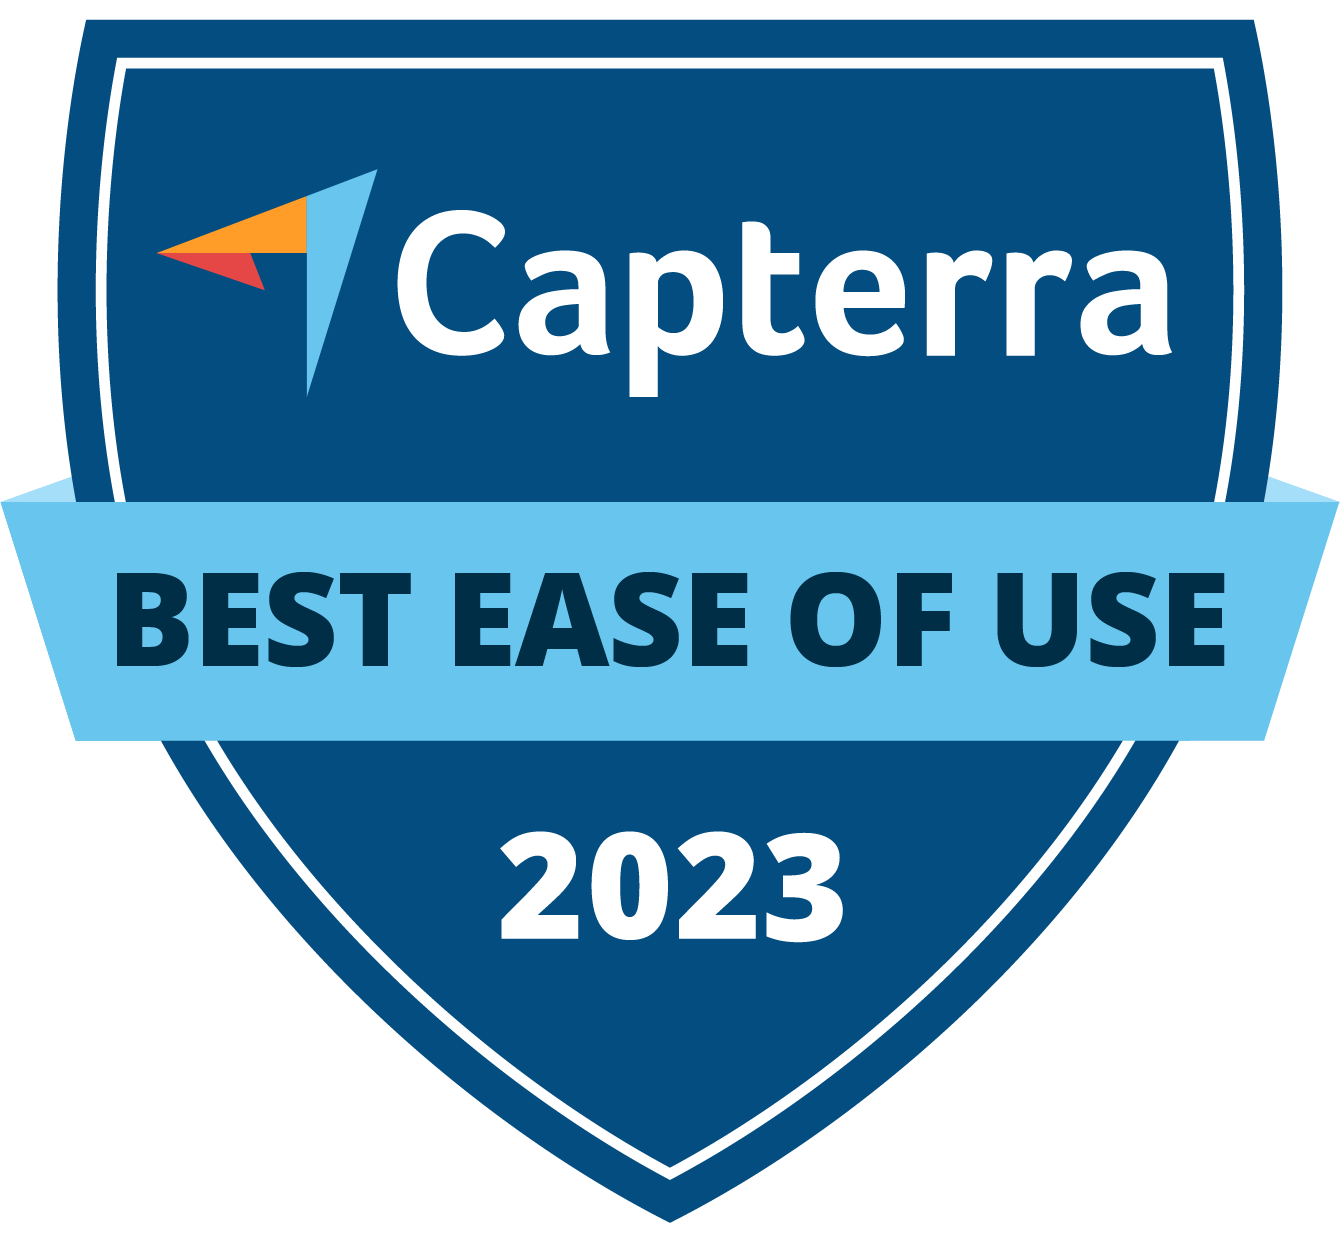 ca-ease_of_use-2023